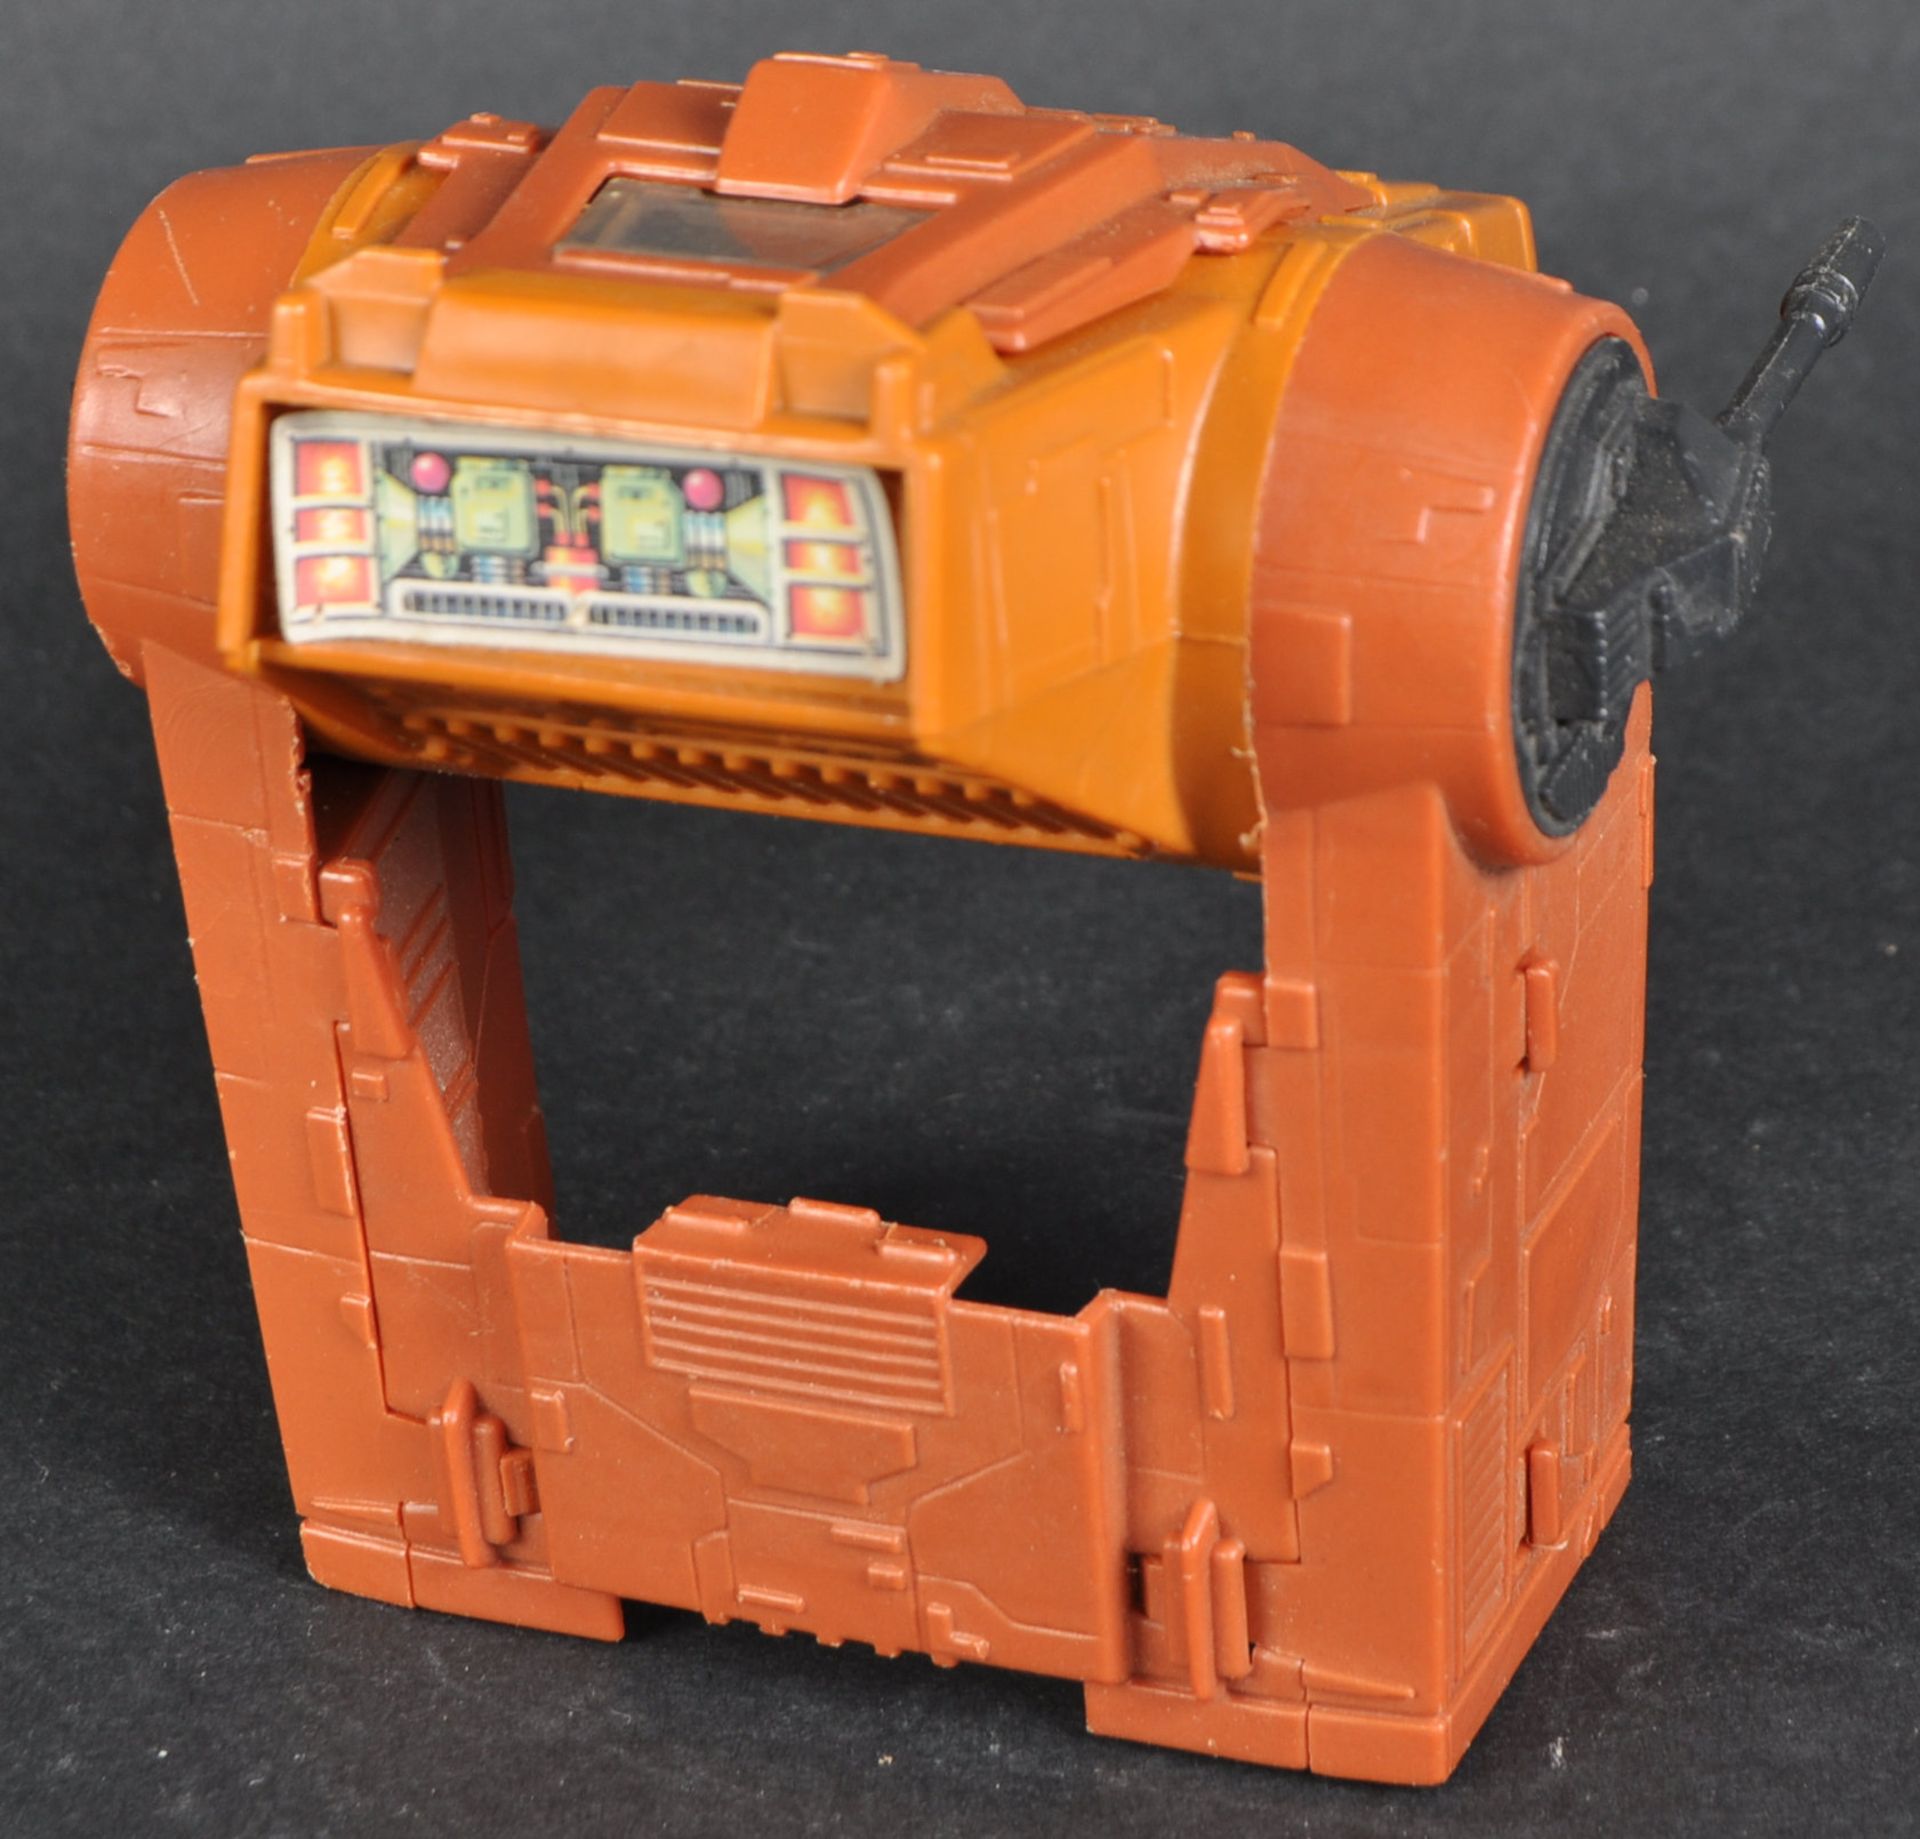 ESTATE OF DAVE PROWSE - PERSONALLY OWNED STAR WARS PLAYSET - Image 2 of 5